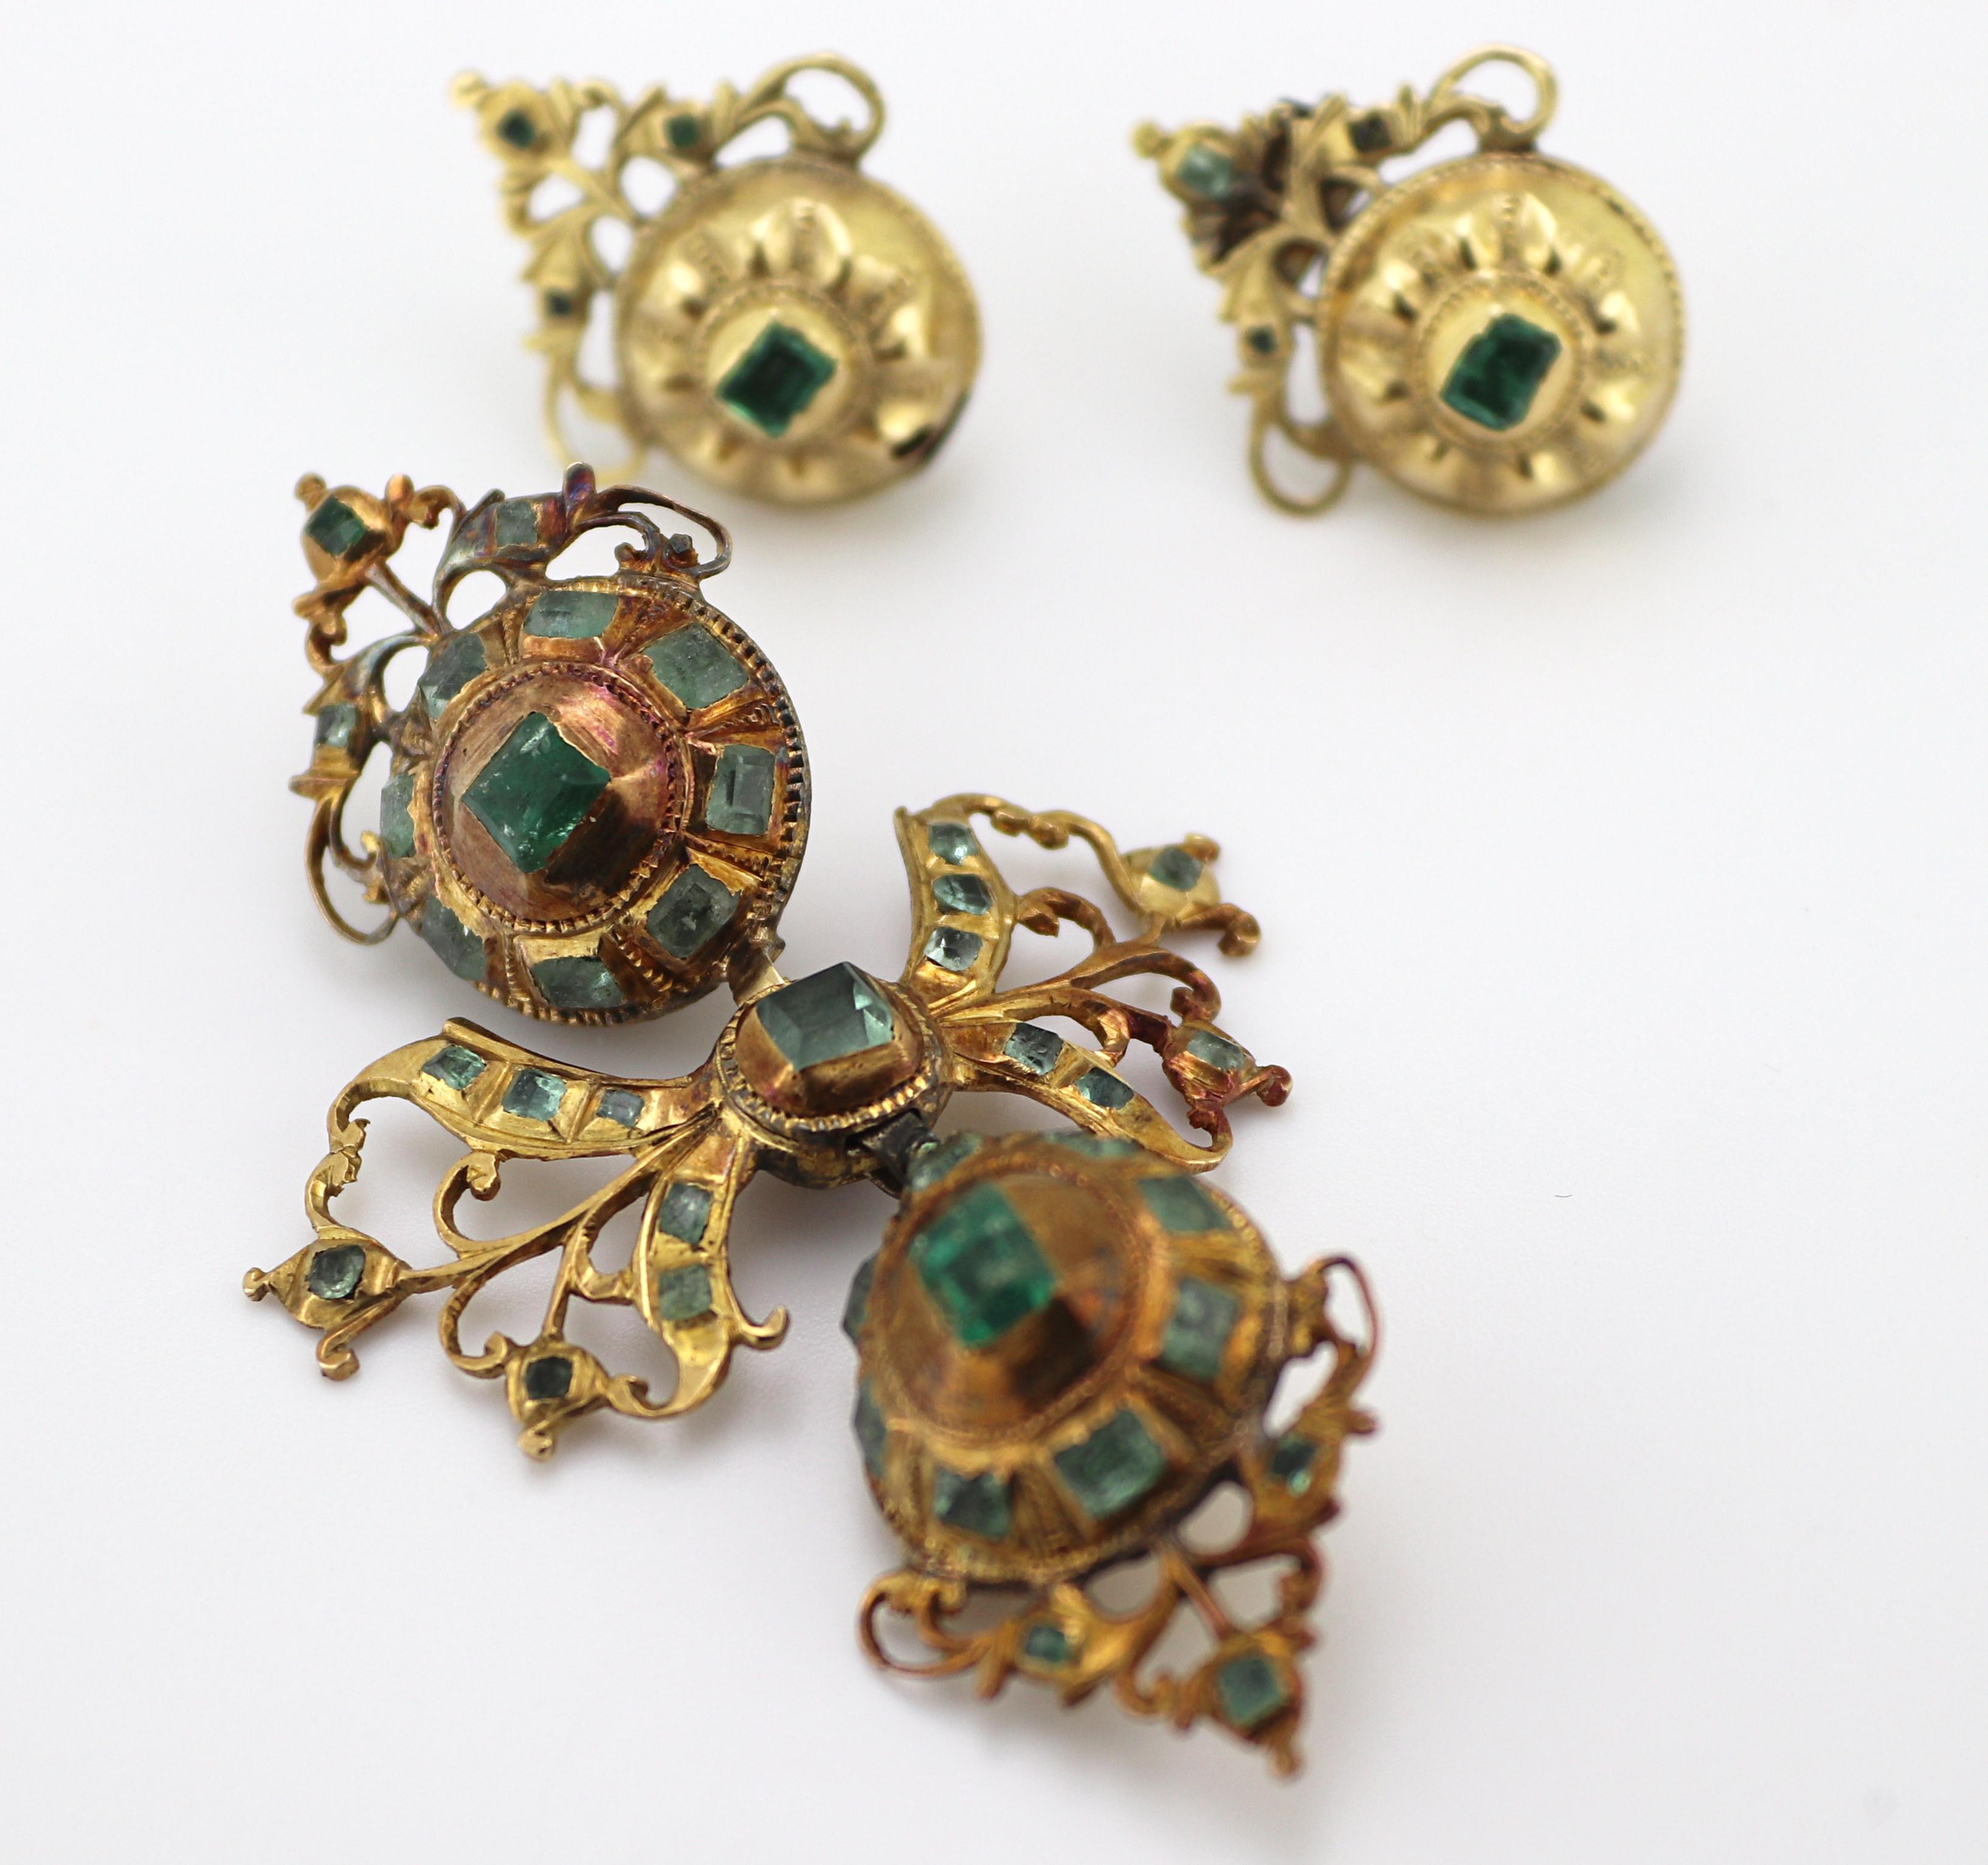 Including one Latin lace cross, accented throughout by (38) table-cut
emeralds and green beryl, set in a hand fabricated 15k yellow gold
articulated link mounting, 57.9 X 35.5 X 13.6 mm; accompanied by a
matching pair of buttons and scroll earrings